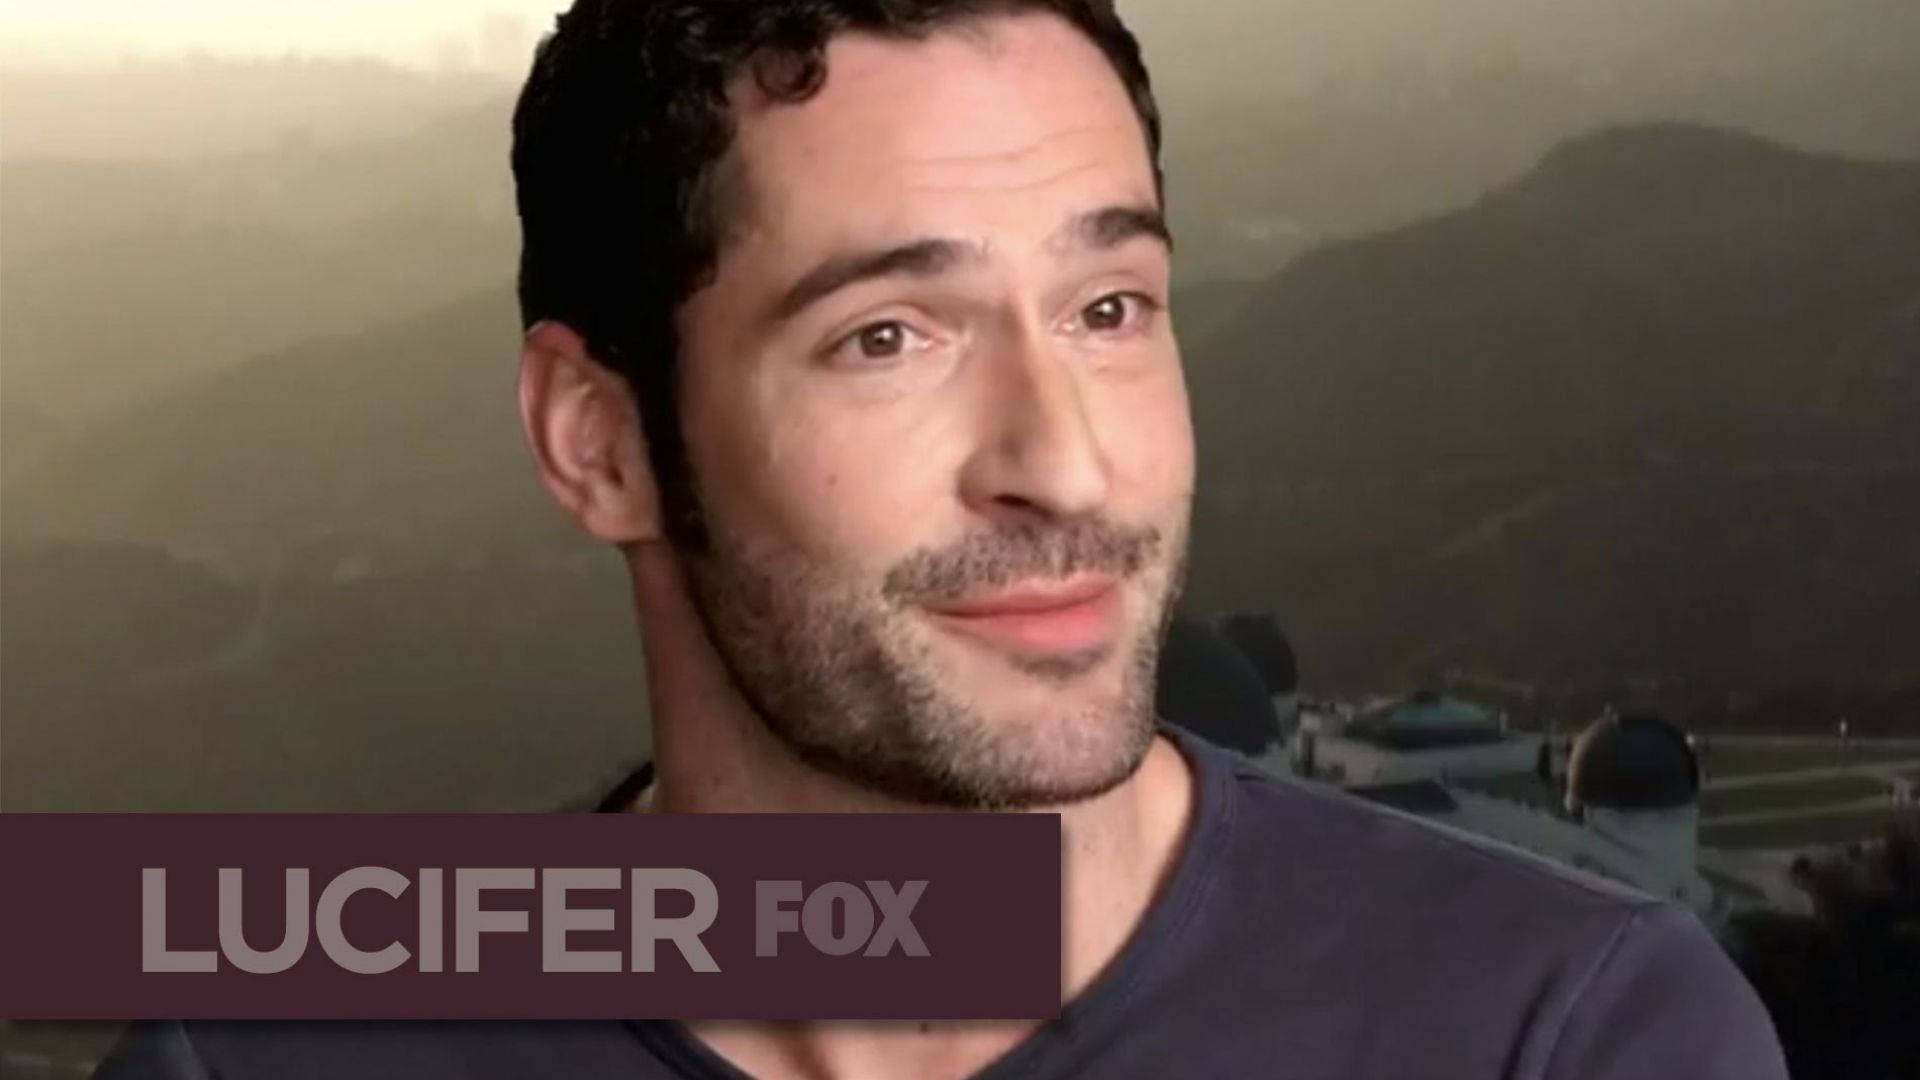 Go inside the world of the new Lucifer tv series featurette